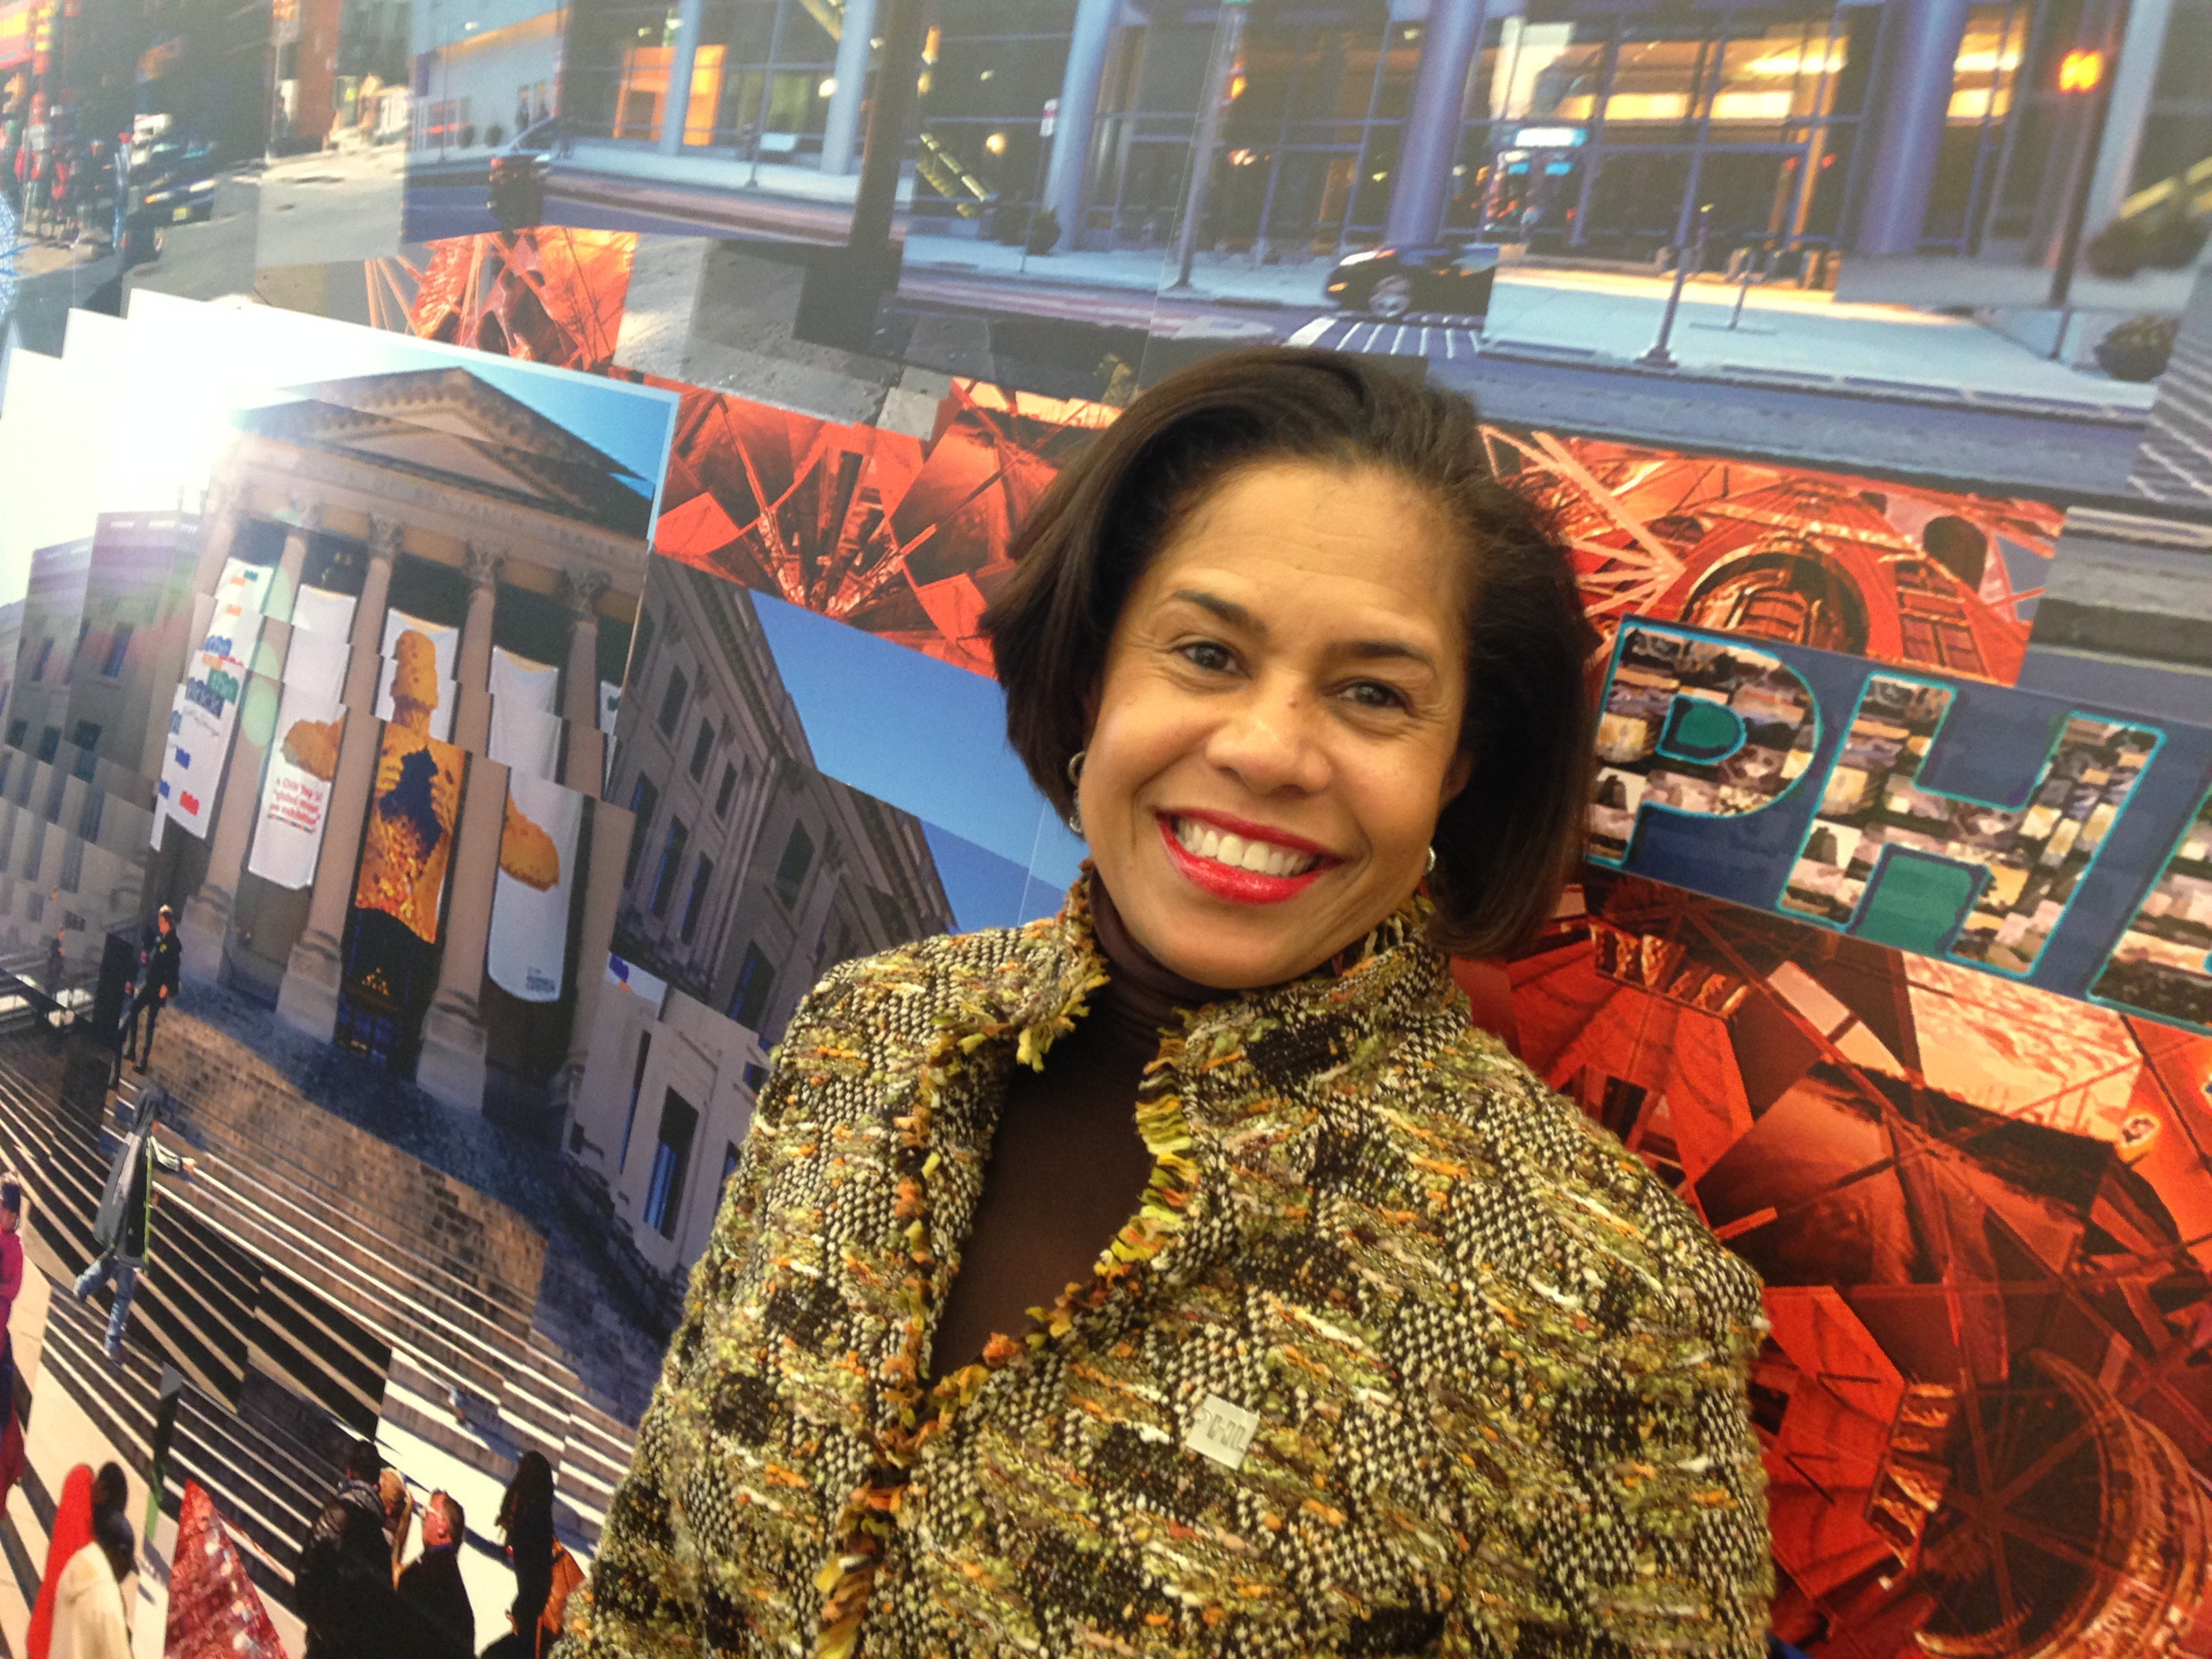  Julie Coker Graham took over the Philadelphia Conventions and Visitors Bureau on Jan. 1, marking the first time a woman and an African American has led the bureau. (Credit: Jennifer Lynn; Mural by the Phila. Mural Arts Program) 